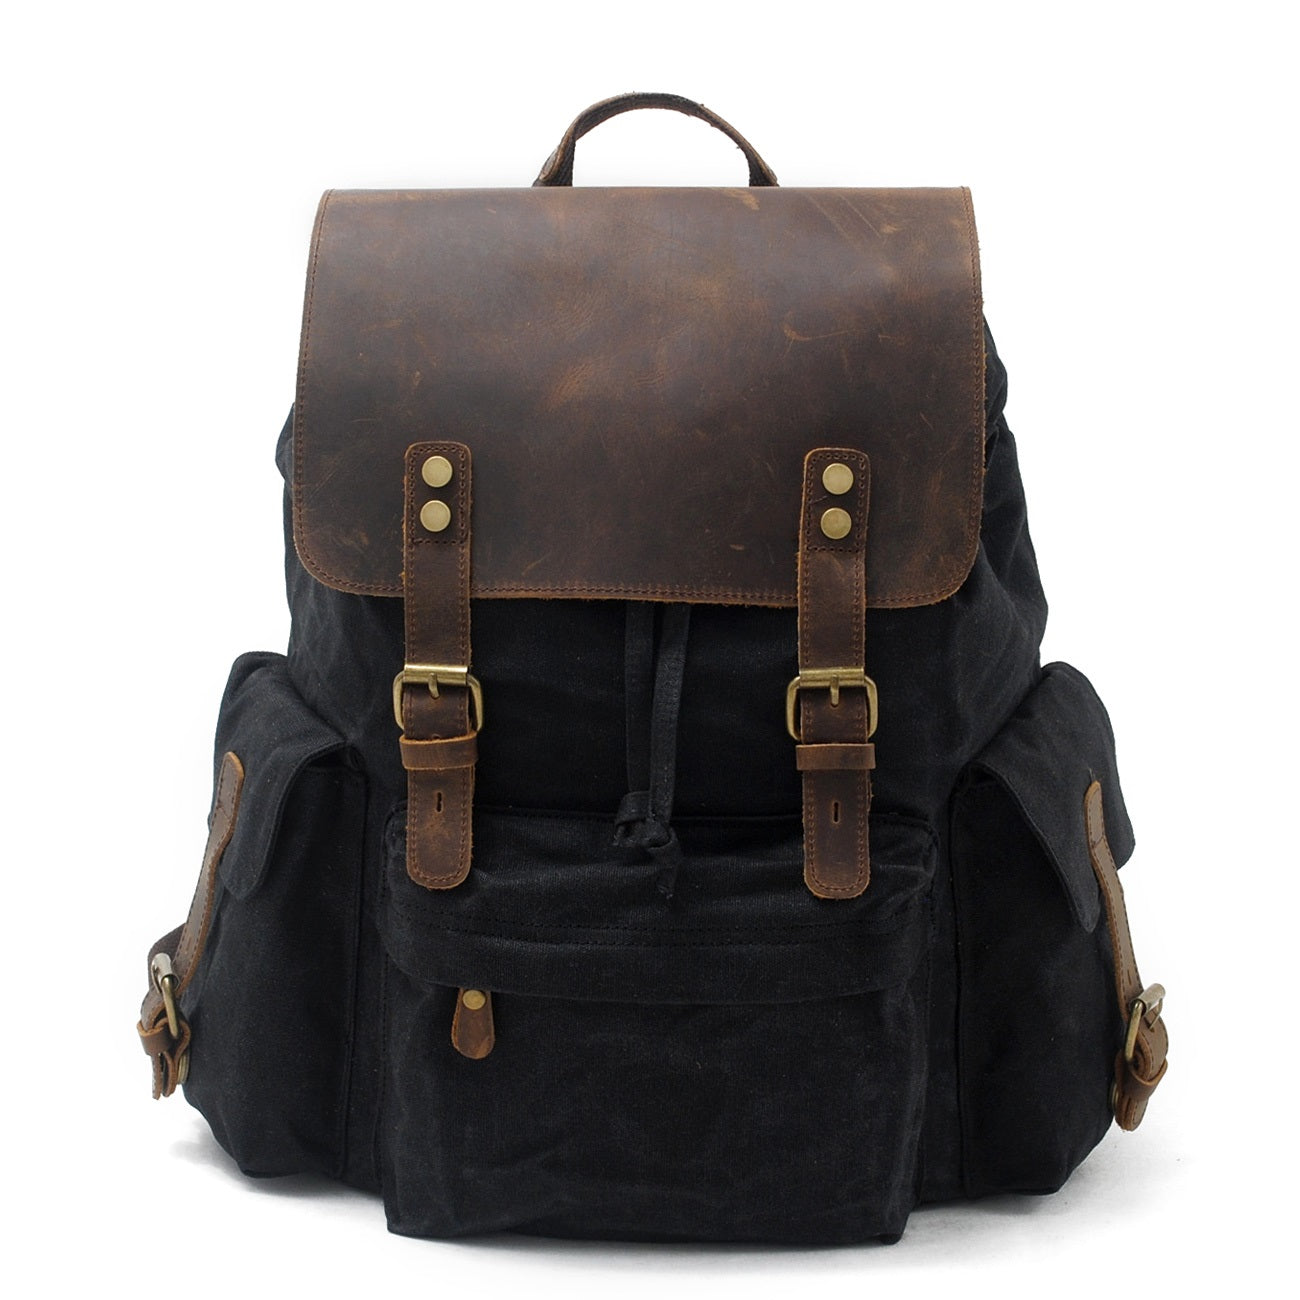 Vintage Backpack for 15.6 Inches - Retro Charm, Modern Convenience– Ecosusi